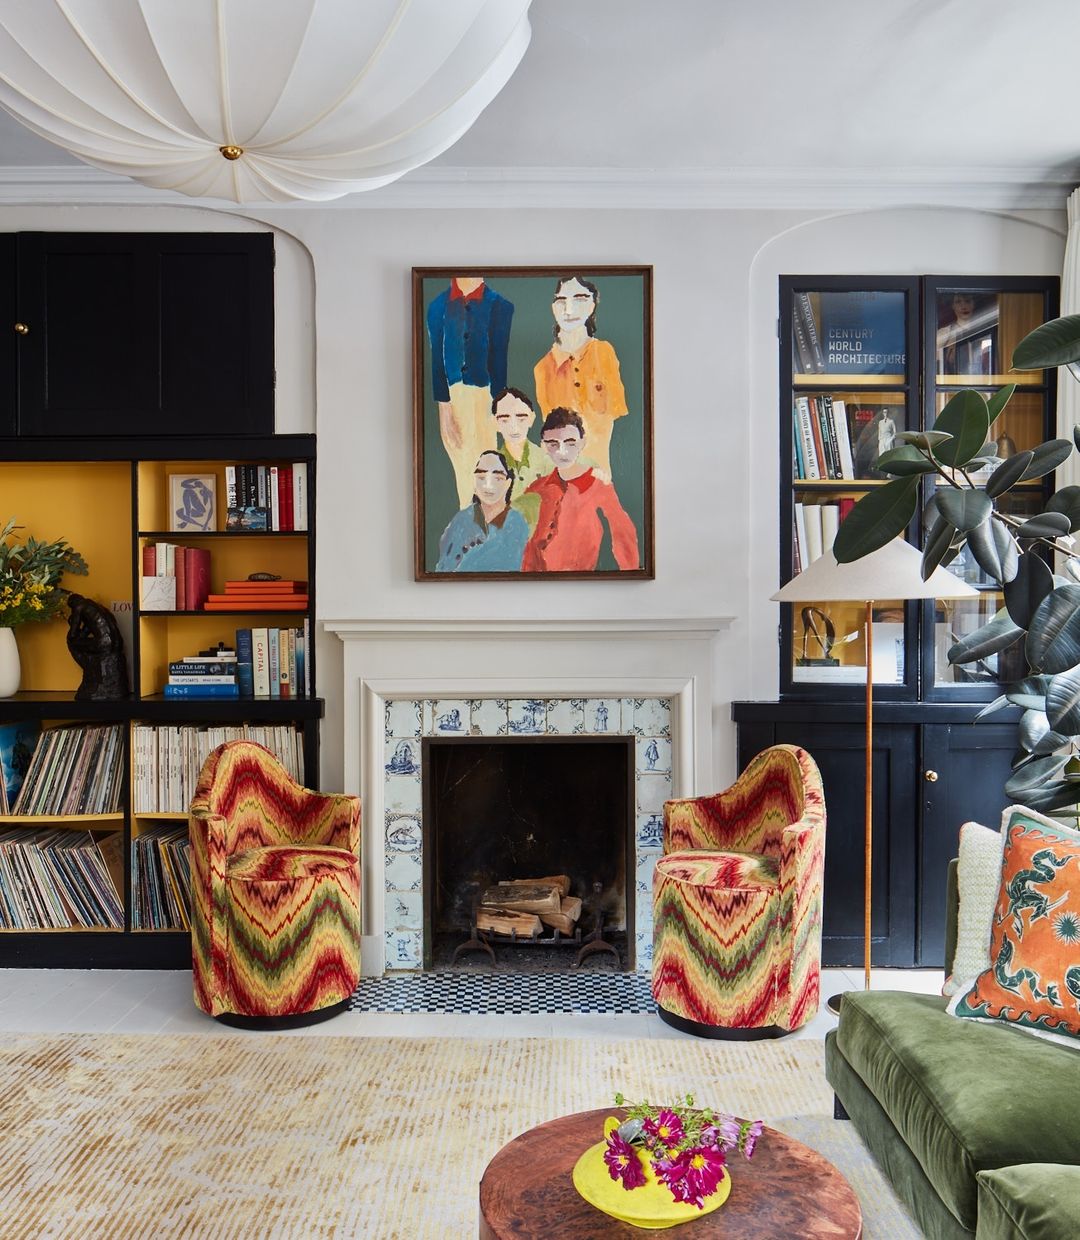 Eclectic Vibrance by the Hearth